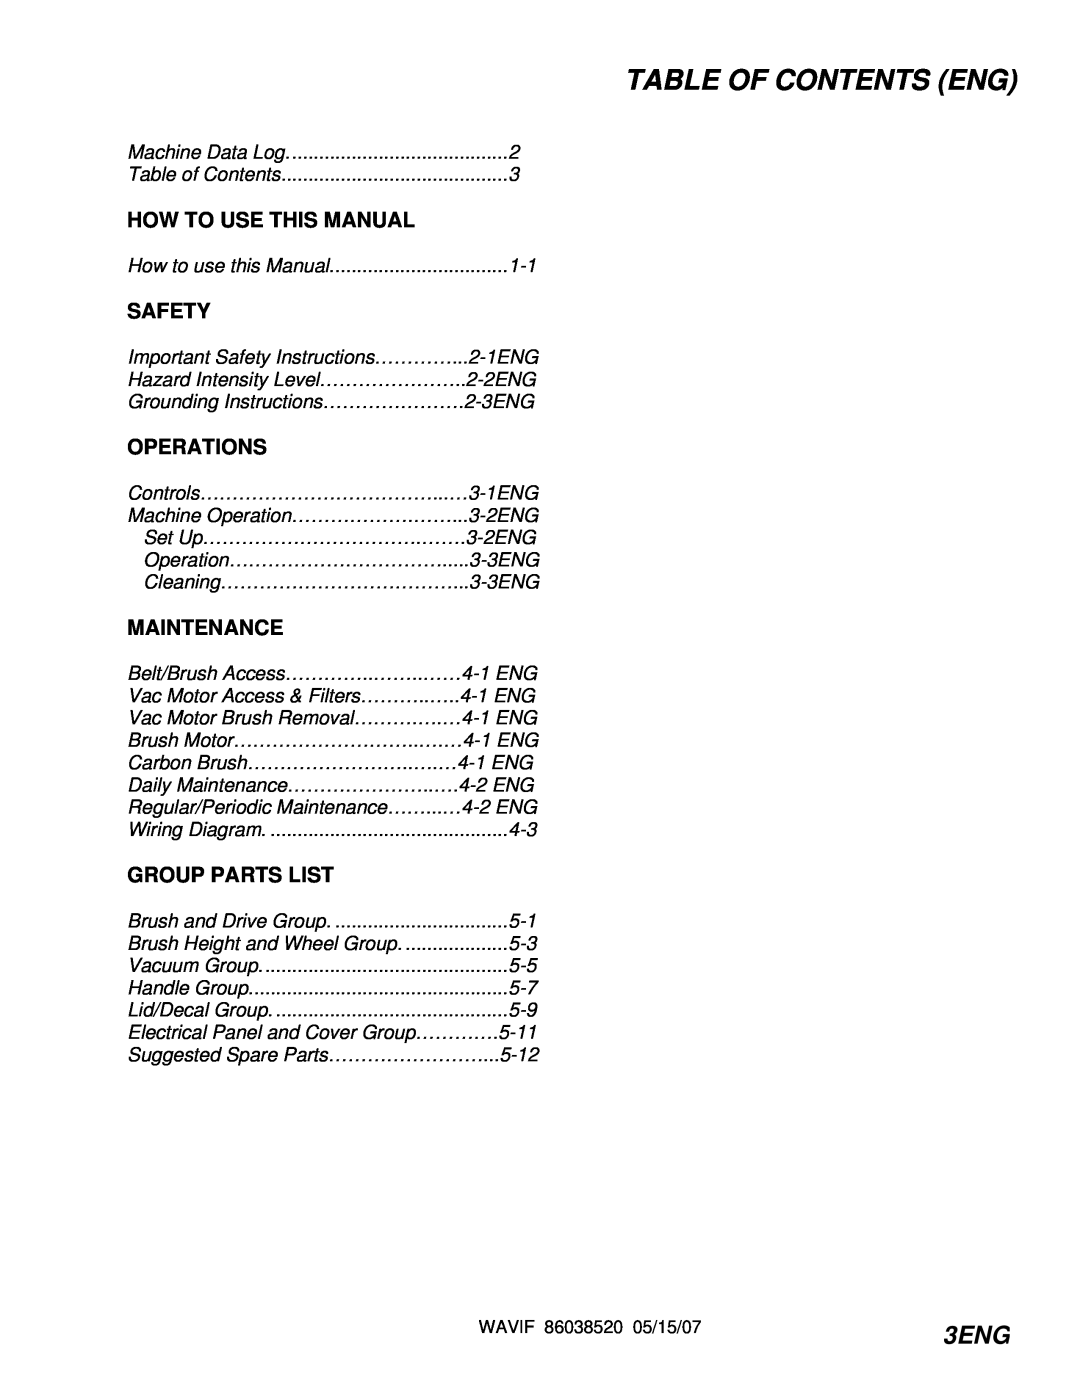 Windsor 10125060 Table Of Contents Eng, 3ENG, How To Use This Manual, Safety, Operations, Maintenance, Group Parts List 